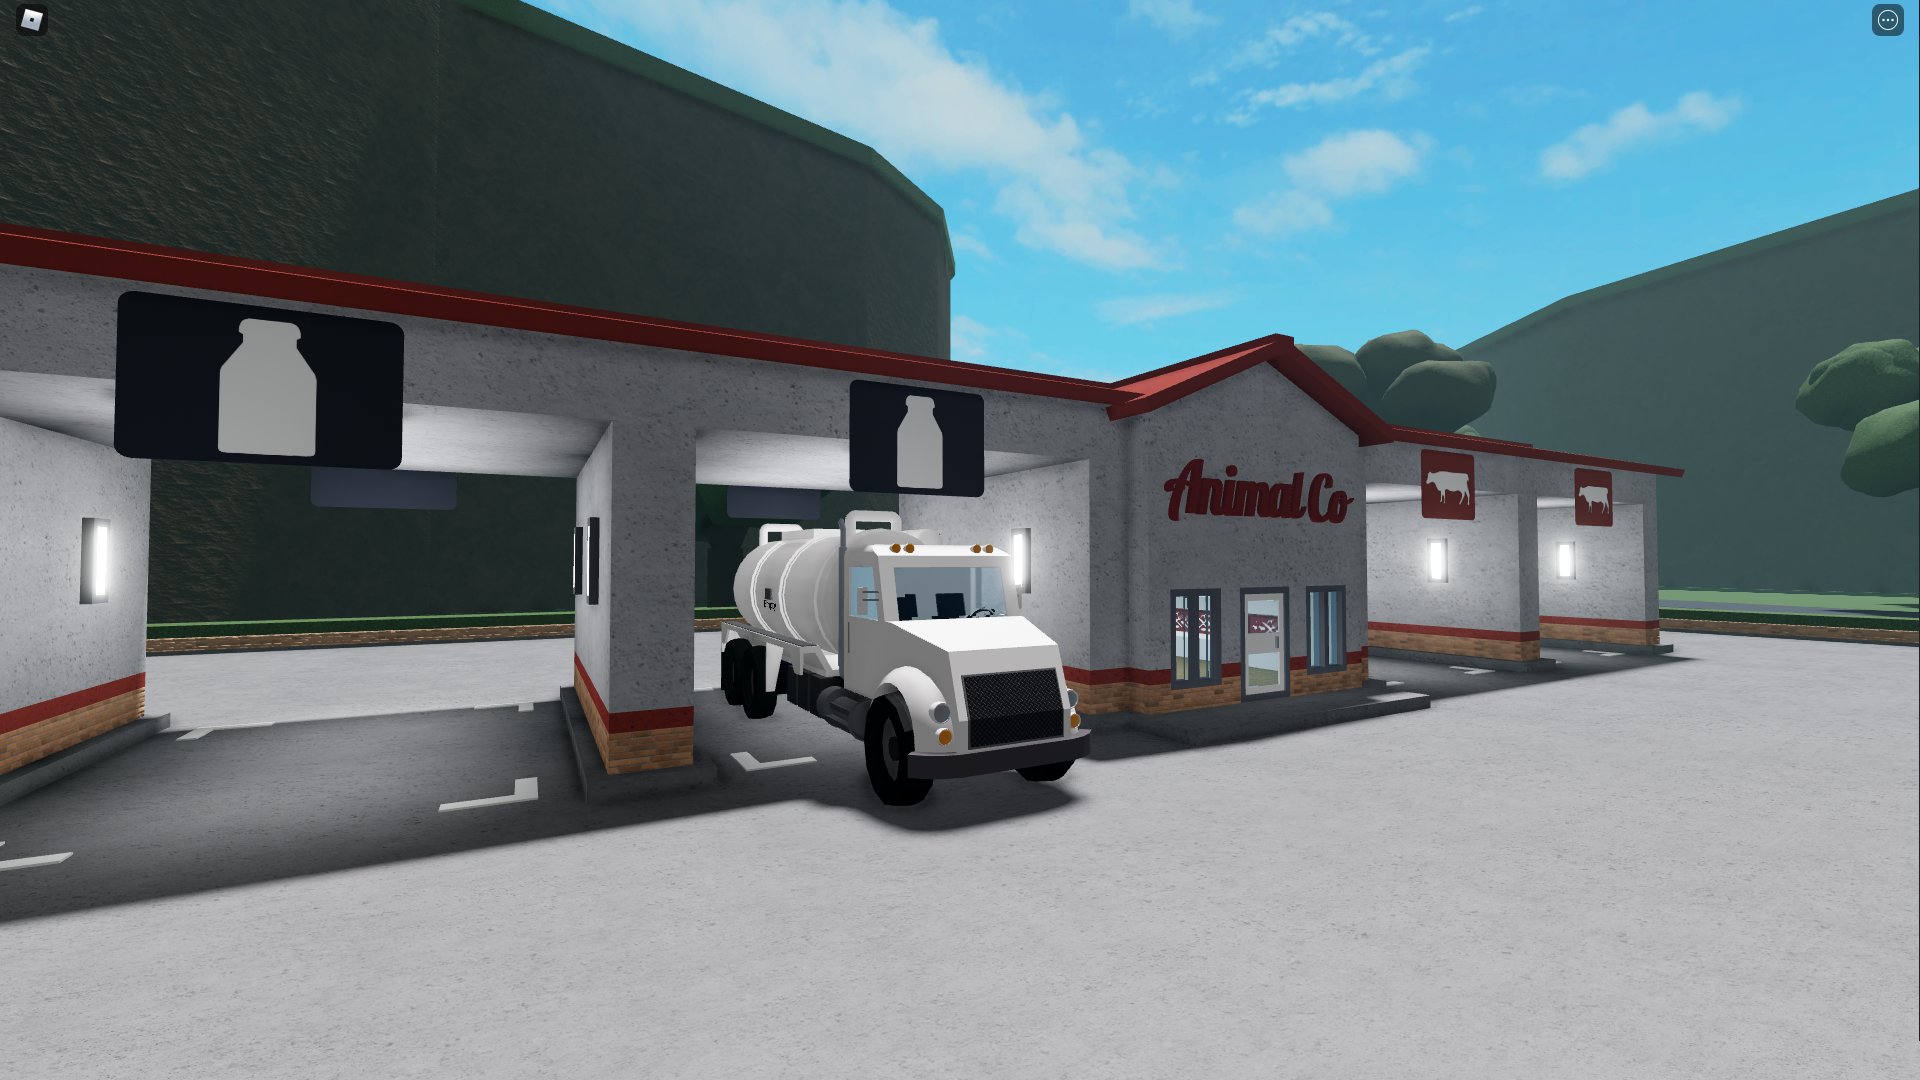 Dunn Games On Twitter Sell Milk With Style In Farming And Friend S Upcoming Update Stay Tuned Play Here Https T Co Ta62uv8qhc Roblox Robloxdev Https T Co Or5ybbeyx7 - roblox farming and friends codes